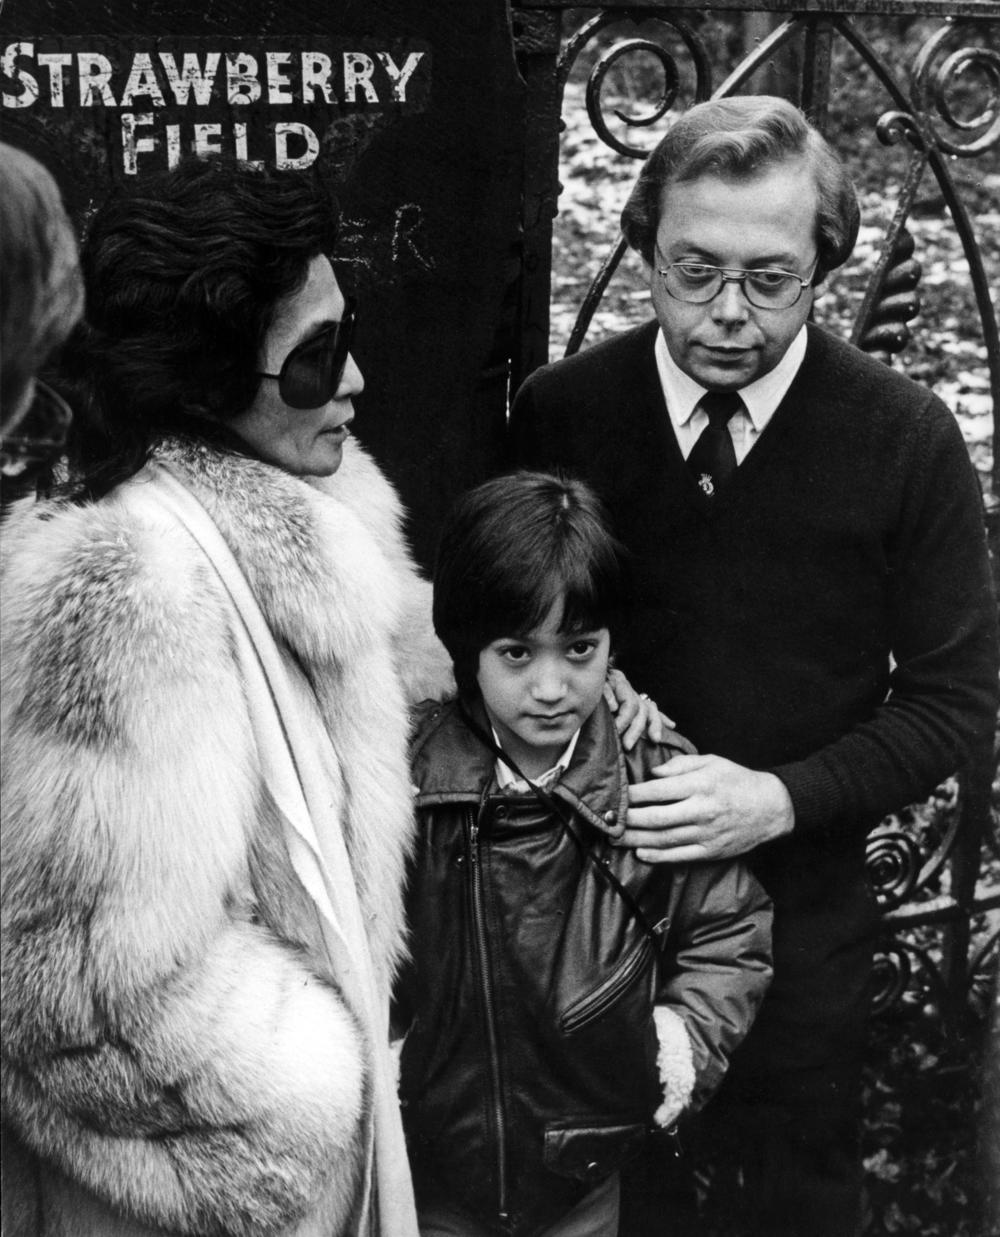 Yoko Ono and a young Sean Ono Lennon and a third man stand in front of a gate post which says Strawberry Field